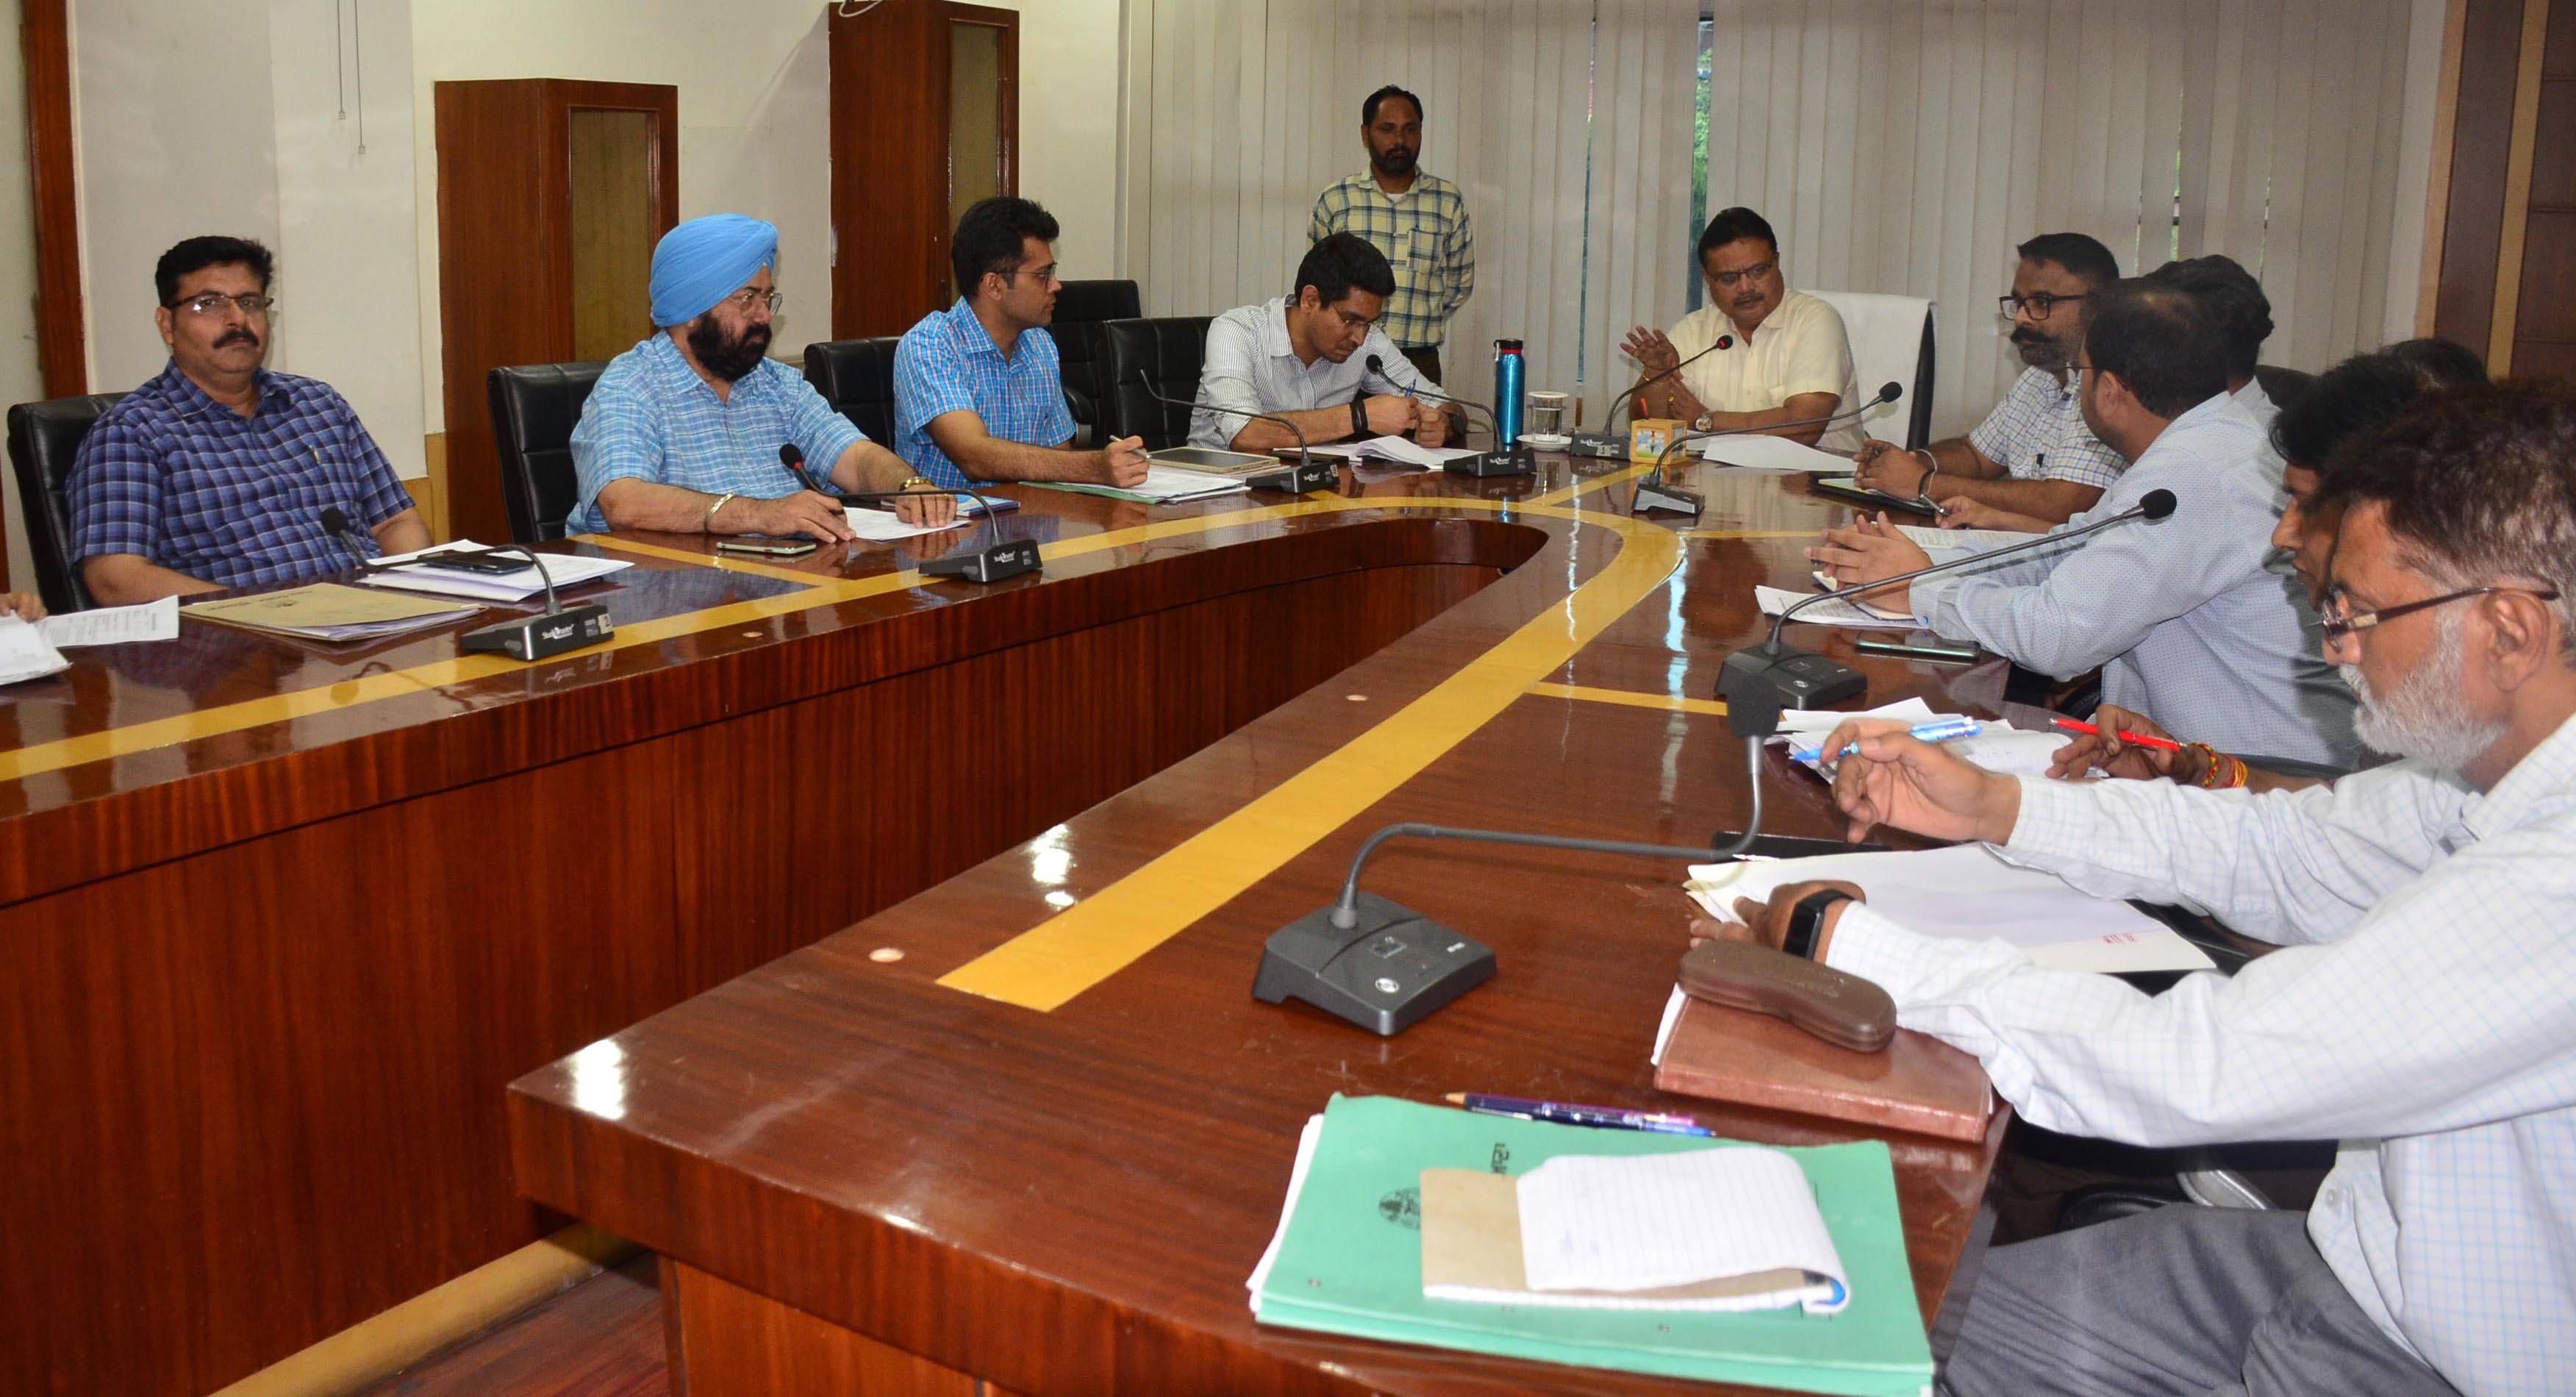 Solid waste management in Ludhiana: Prepare project report in 4 months, MC chief tells firm